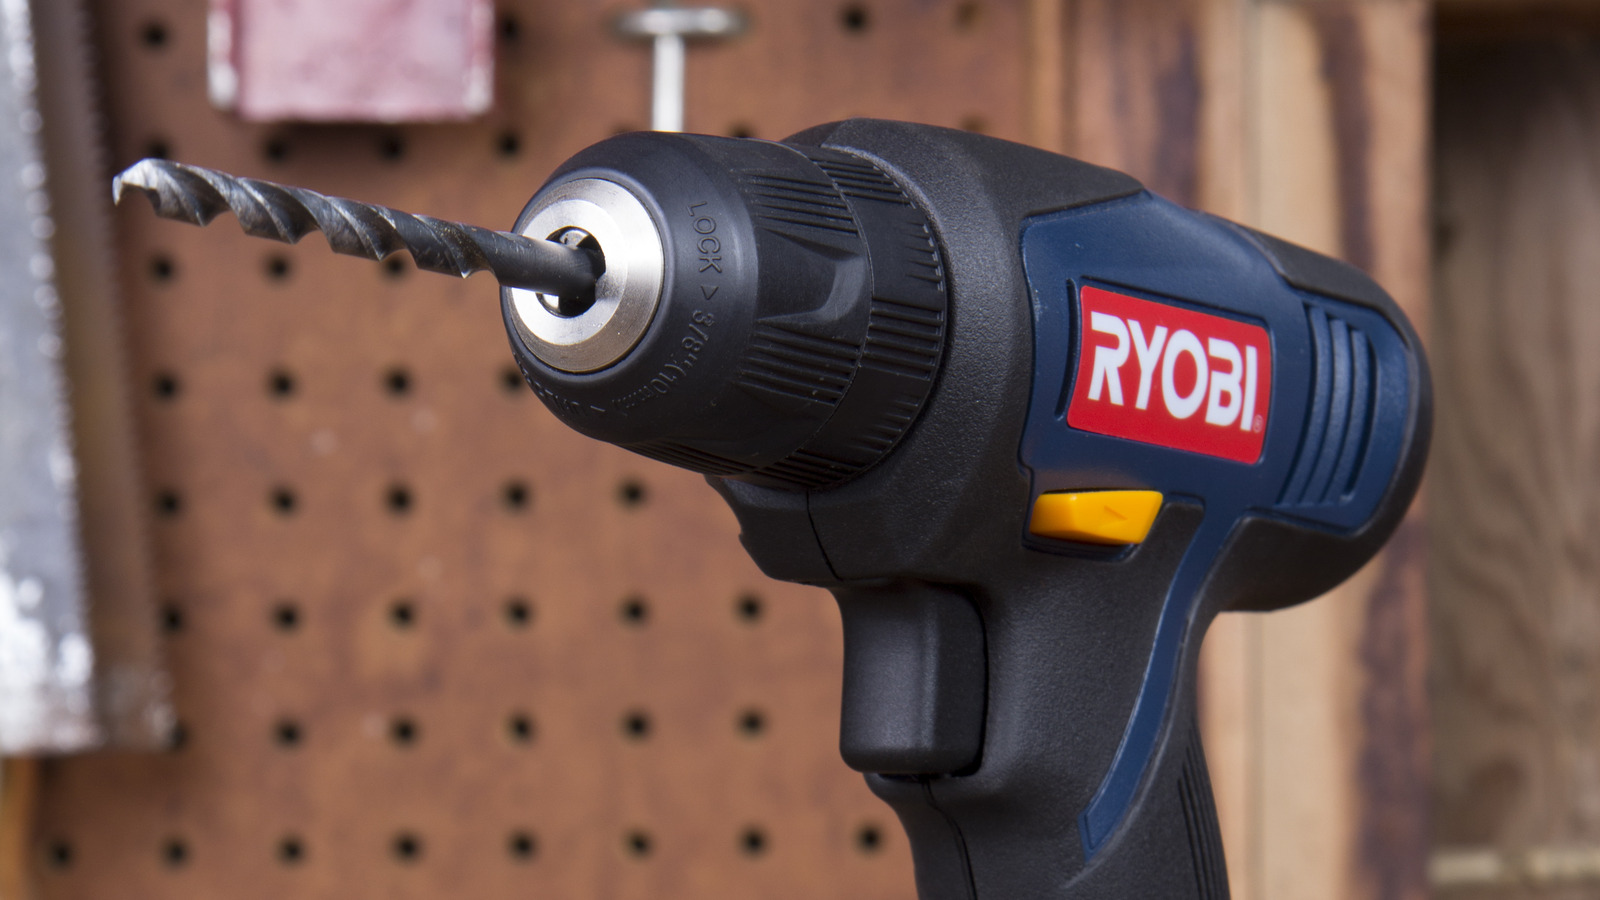 Why You Should Register Your Ryobi Tools